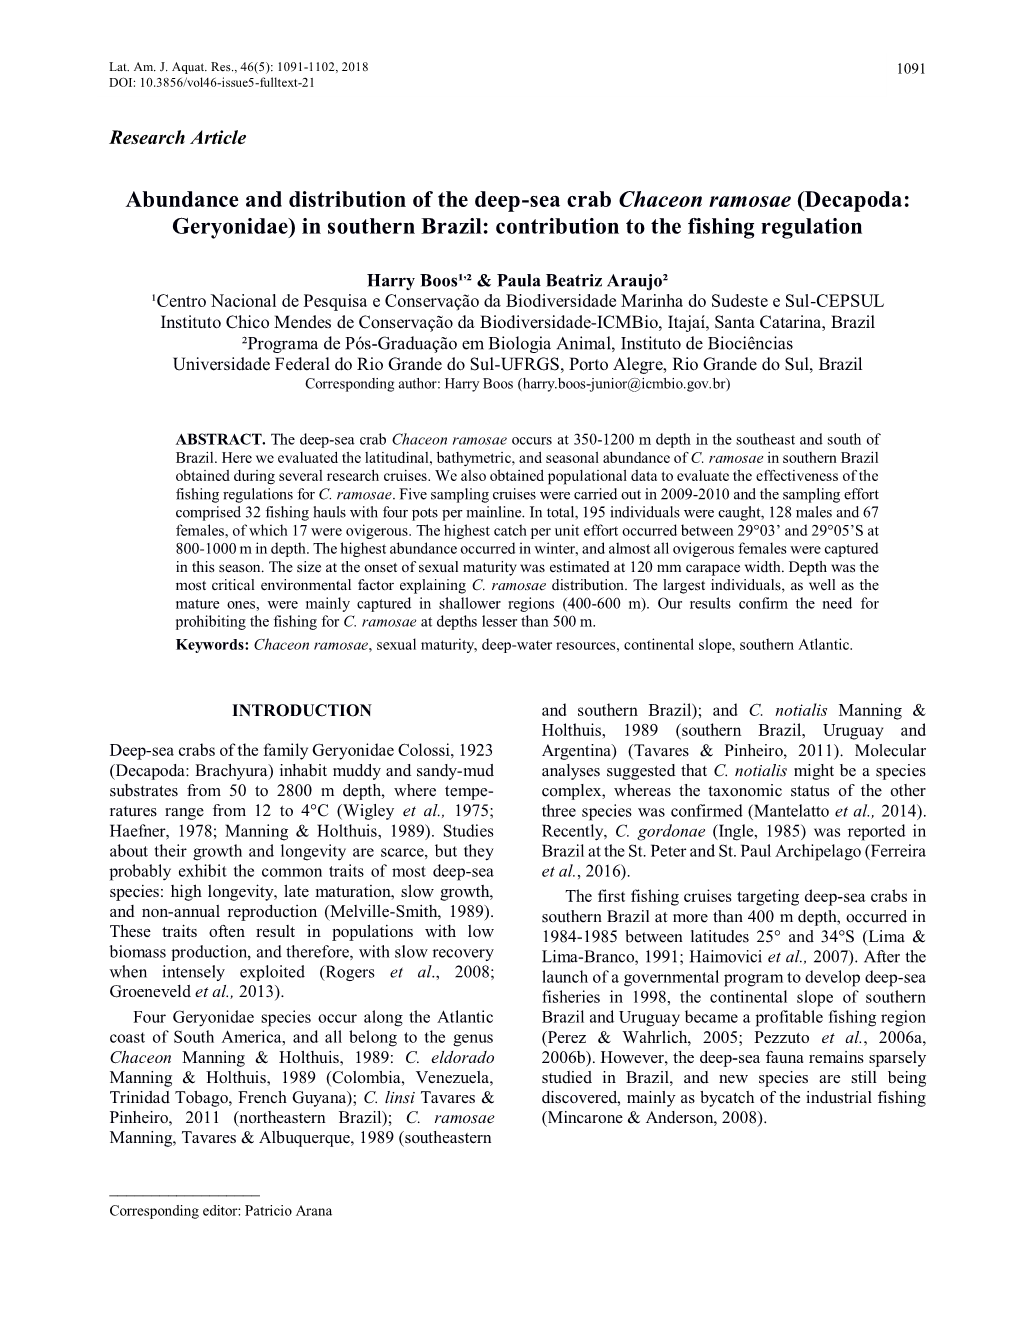 Abundance and Distribution of the Deep-Sea Crab Chaceon Ramosae (Decapoda: Geryonidae) in Southern Brazil: Contribution to the Fishing Regulation